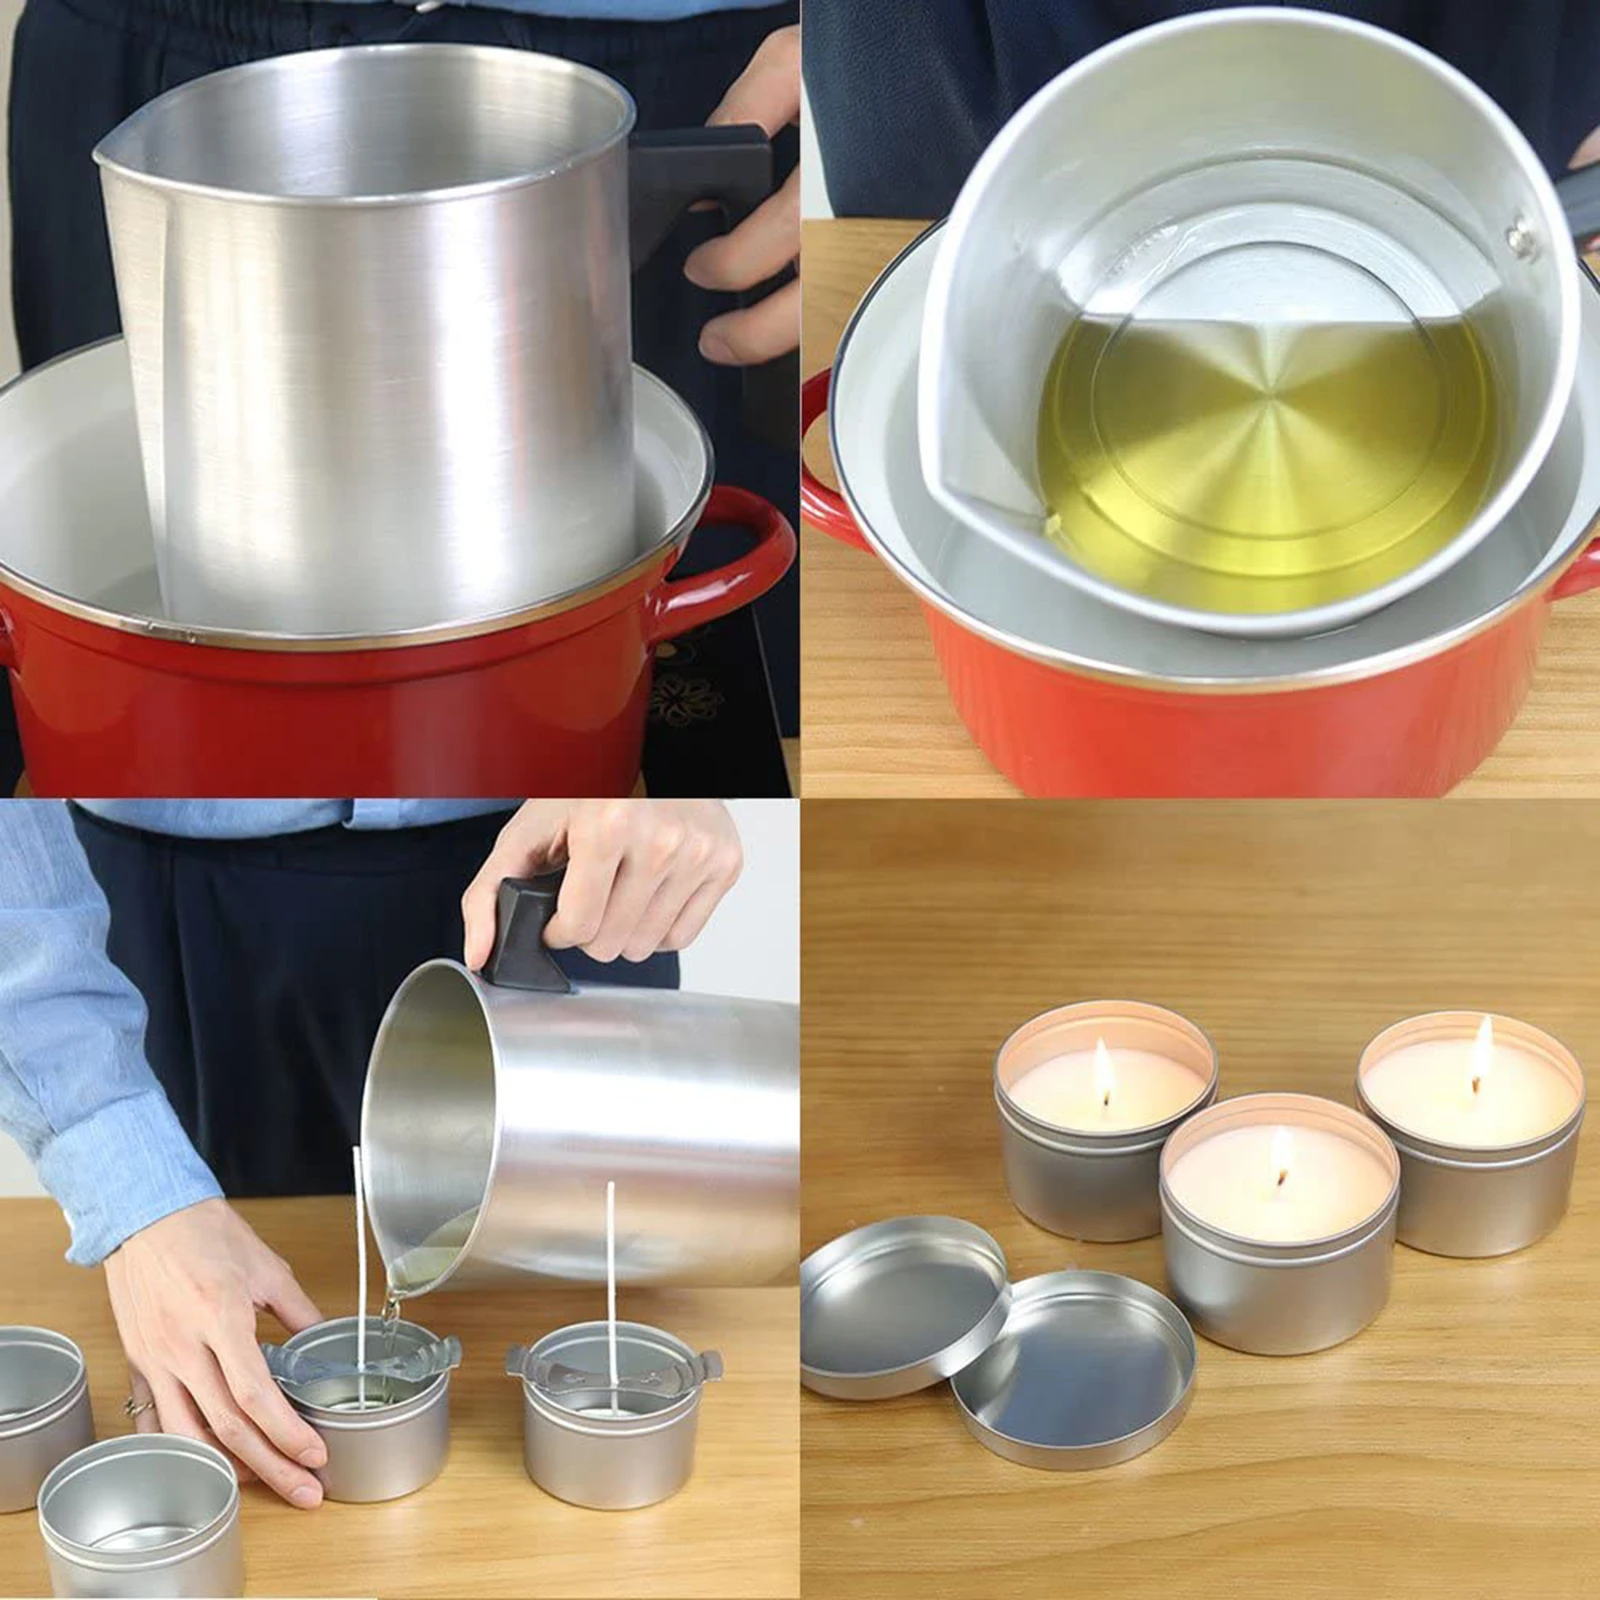 Aluminium 3L Pouring Pot Candle Making Wax Melting Jug Pitcher with Heat-Resisting Handle DIY Soap Making Craft Tool